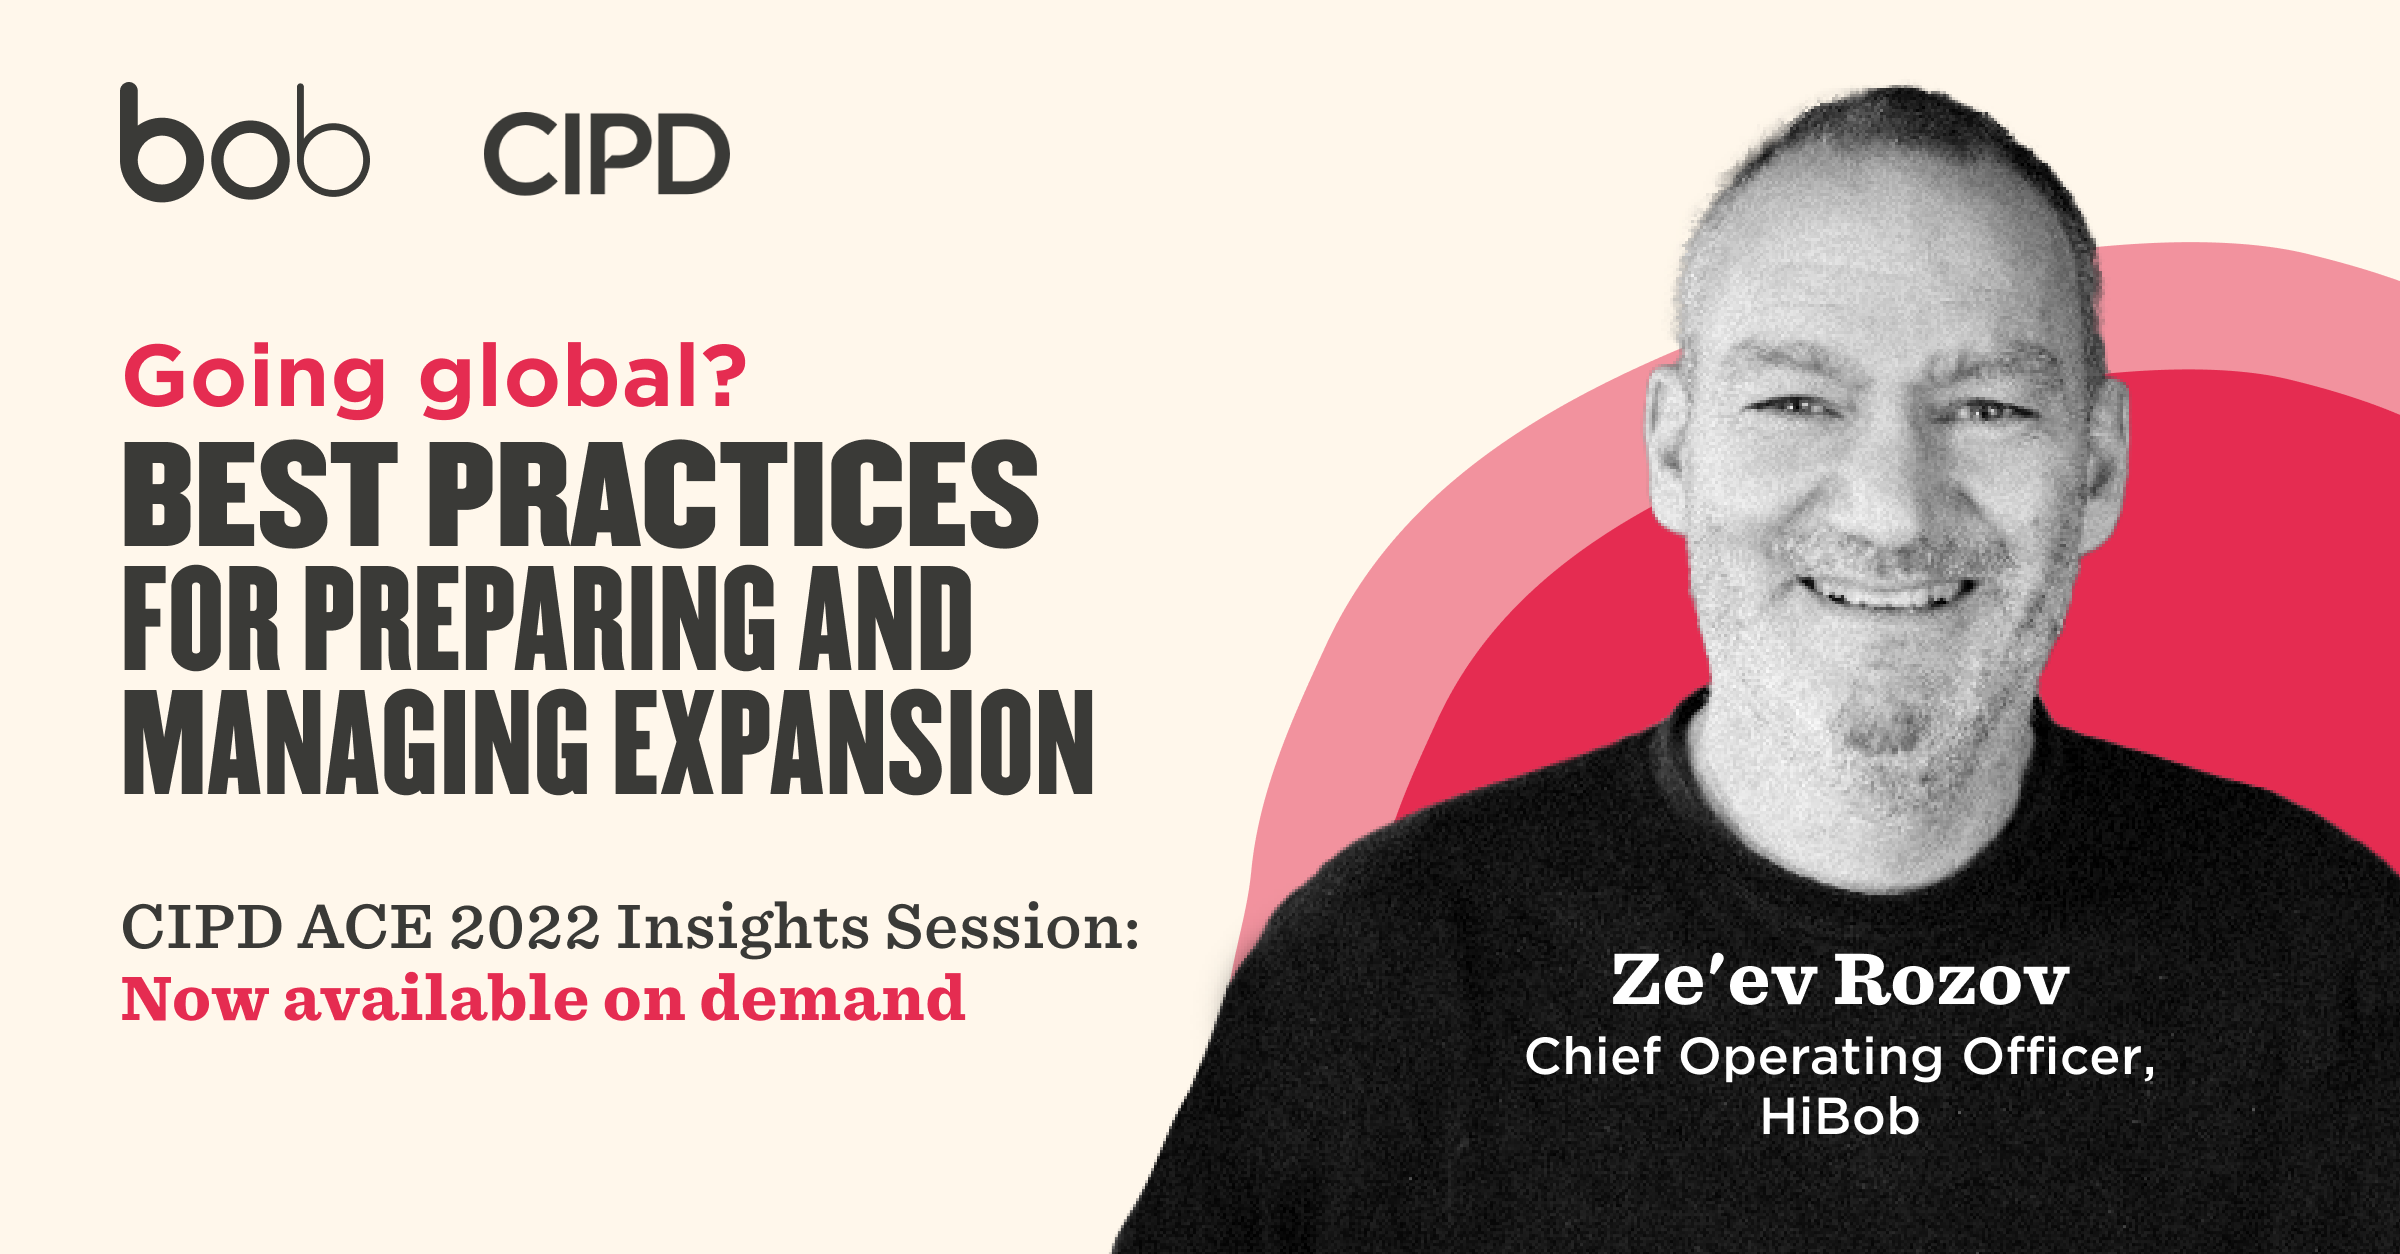 Going Global? Best practices for preparing and managing expansion - CIPD-Annual-Conference-Post-Event_Webinar_sharing-image.png